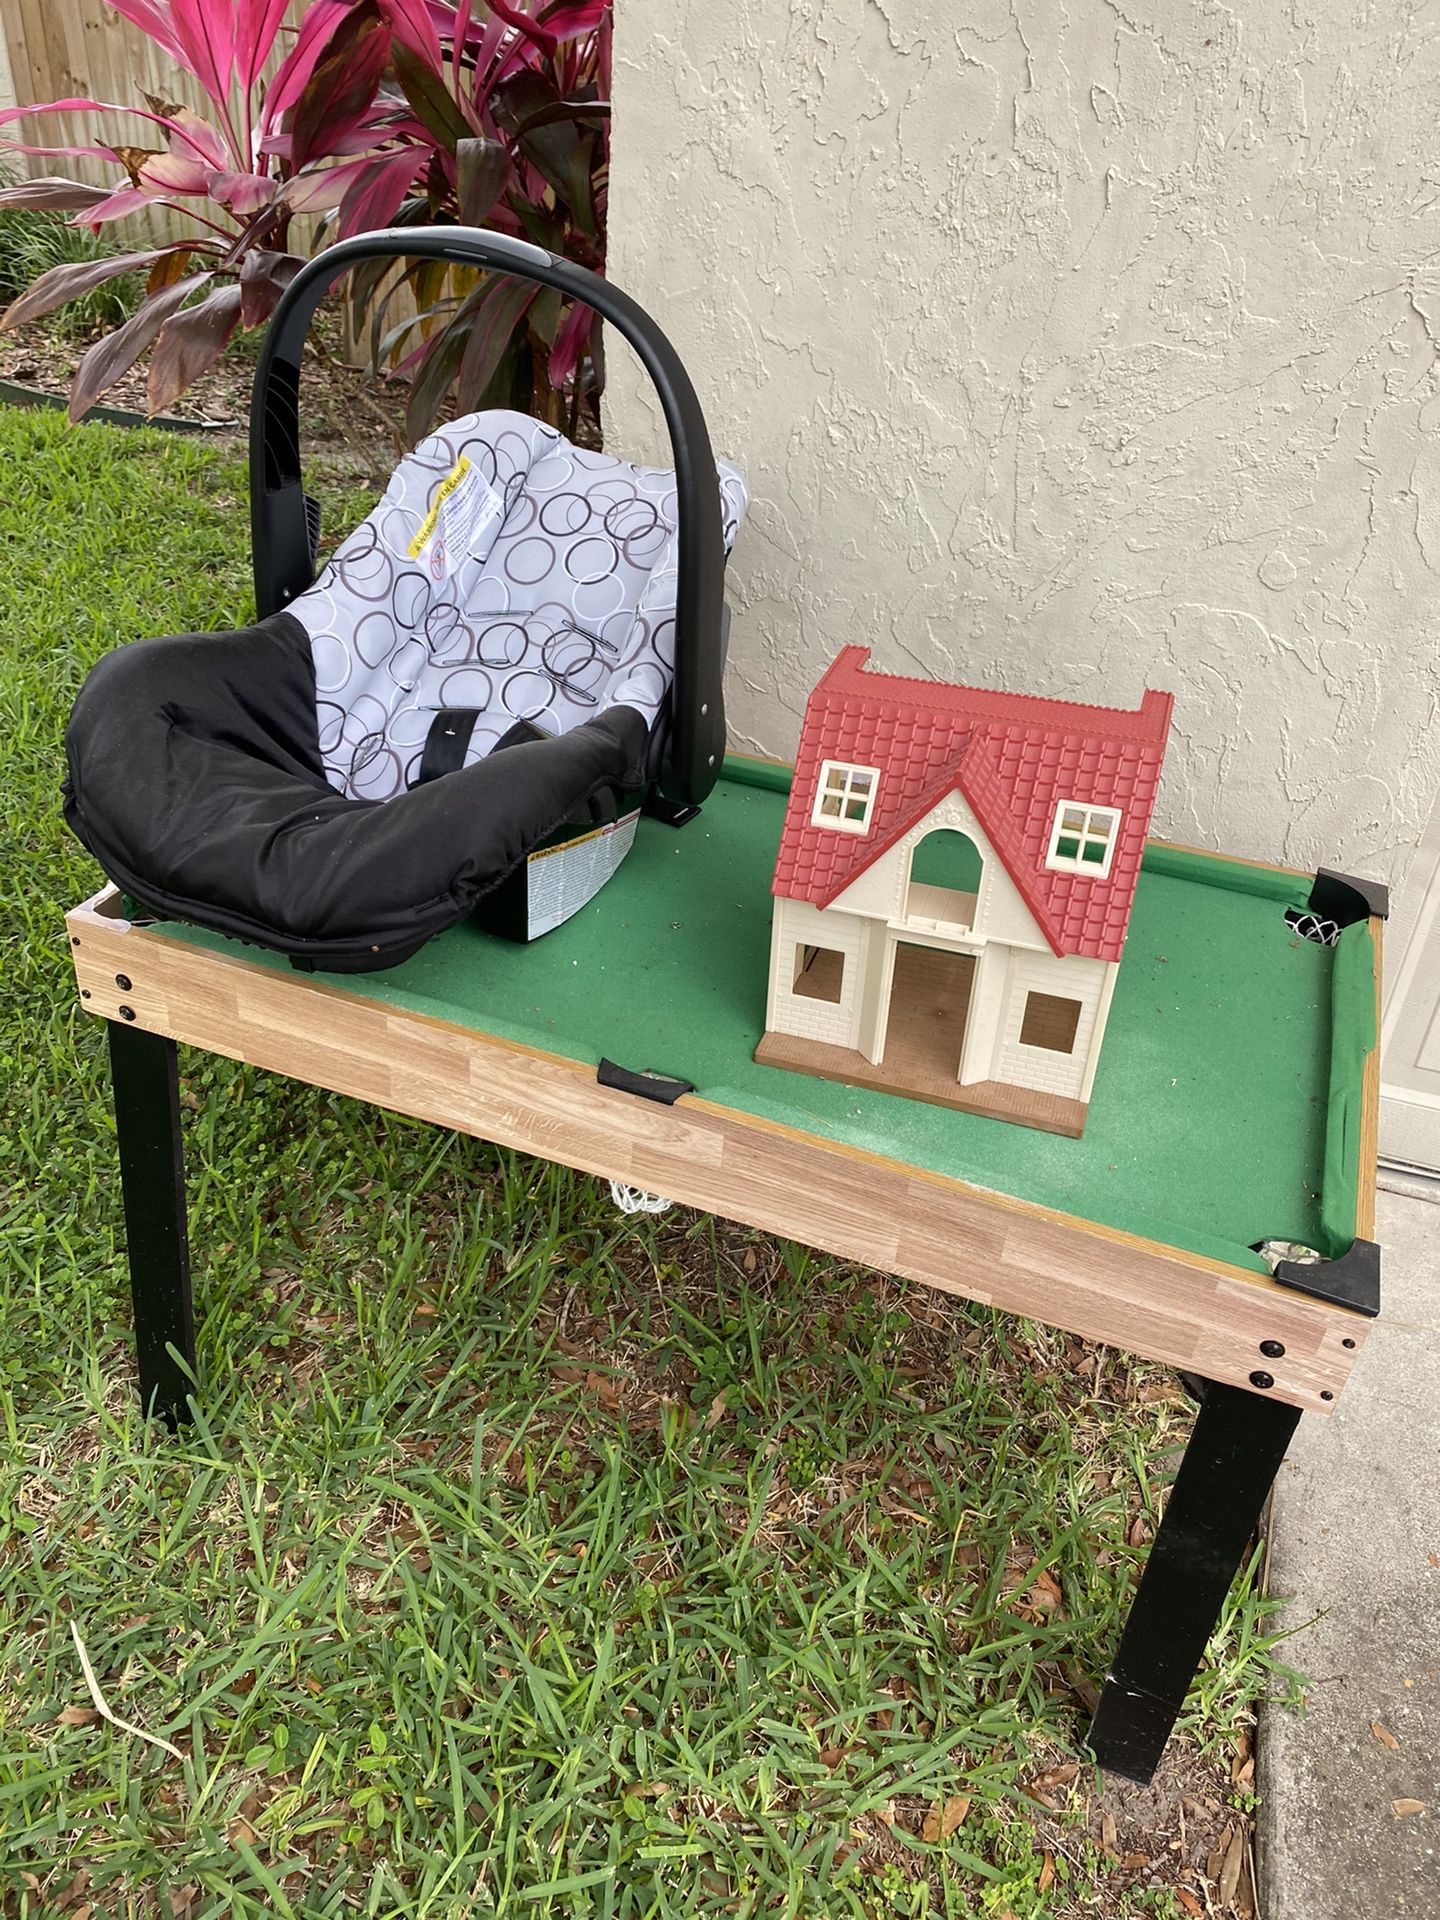 Free Curbside pool table car seat and small play house